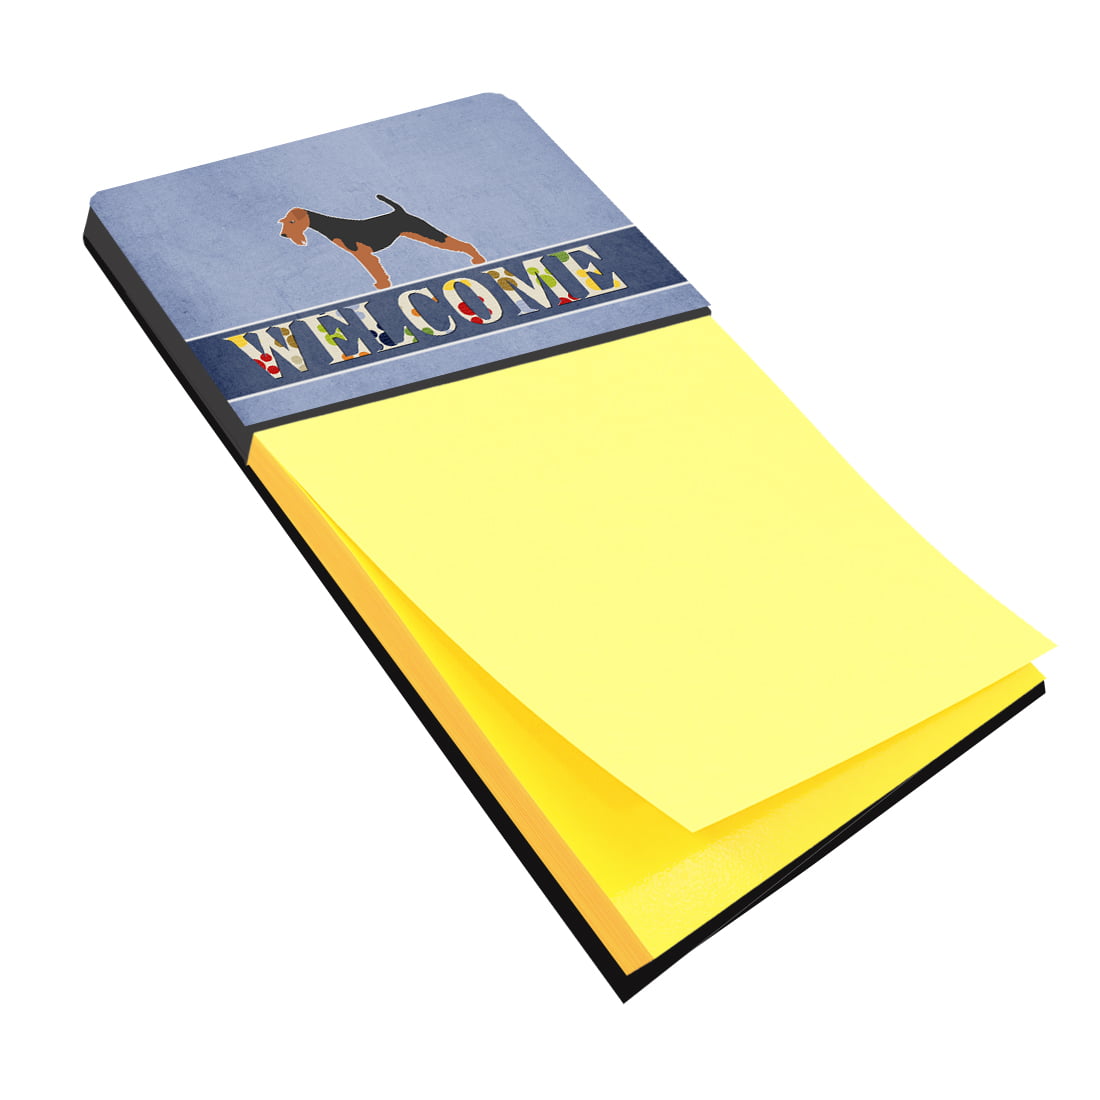 Bb5489sn Welsh Terrier Welcome Sticky Note Holder